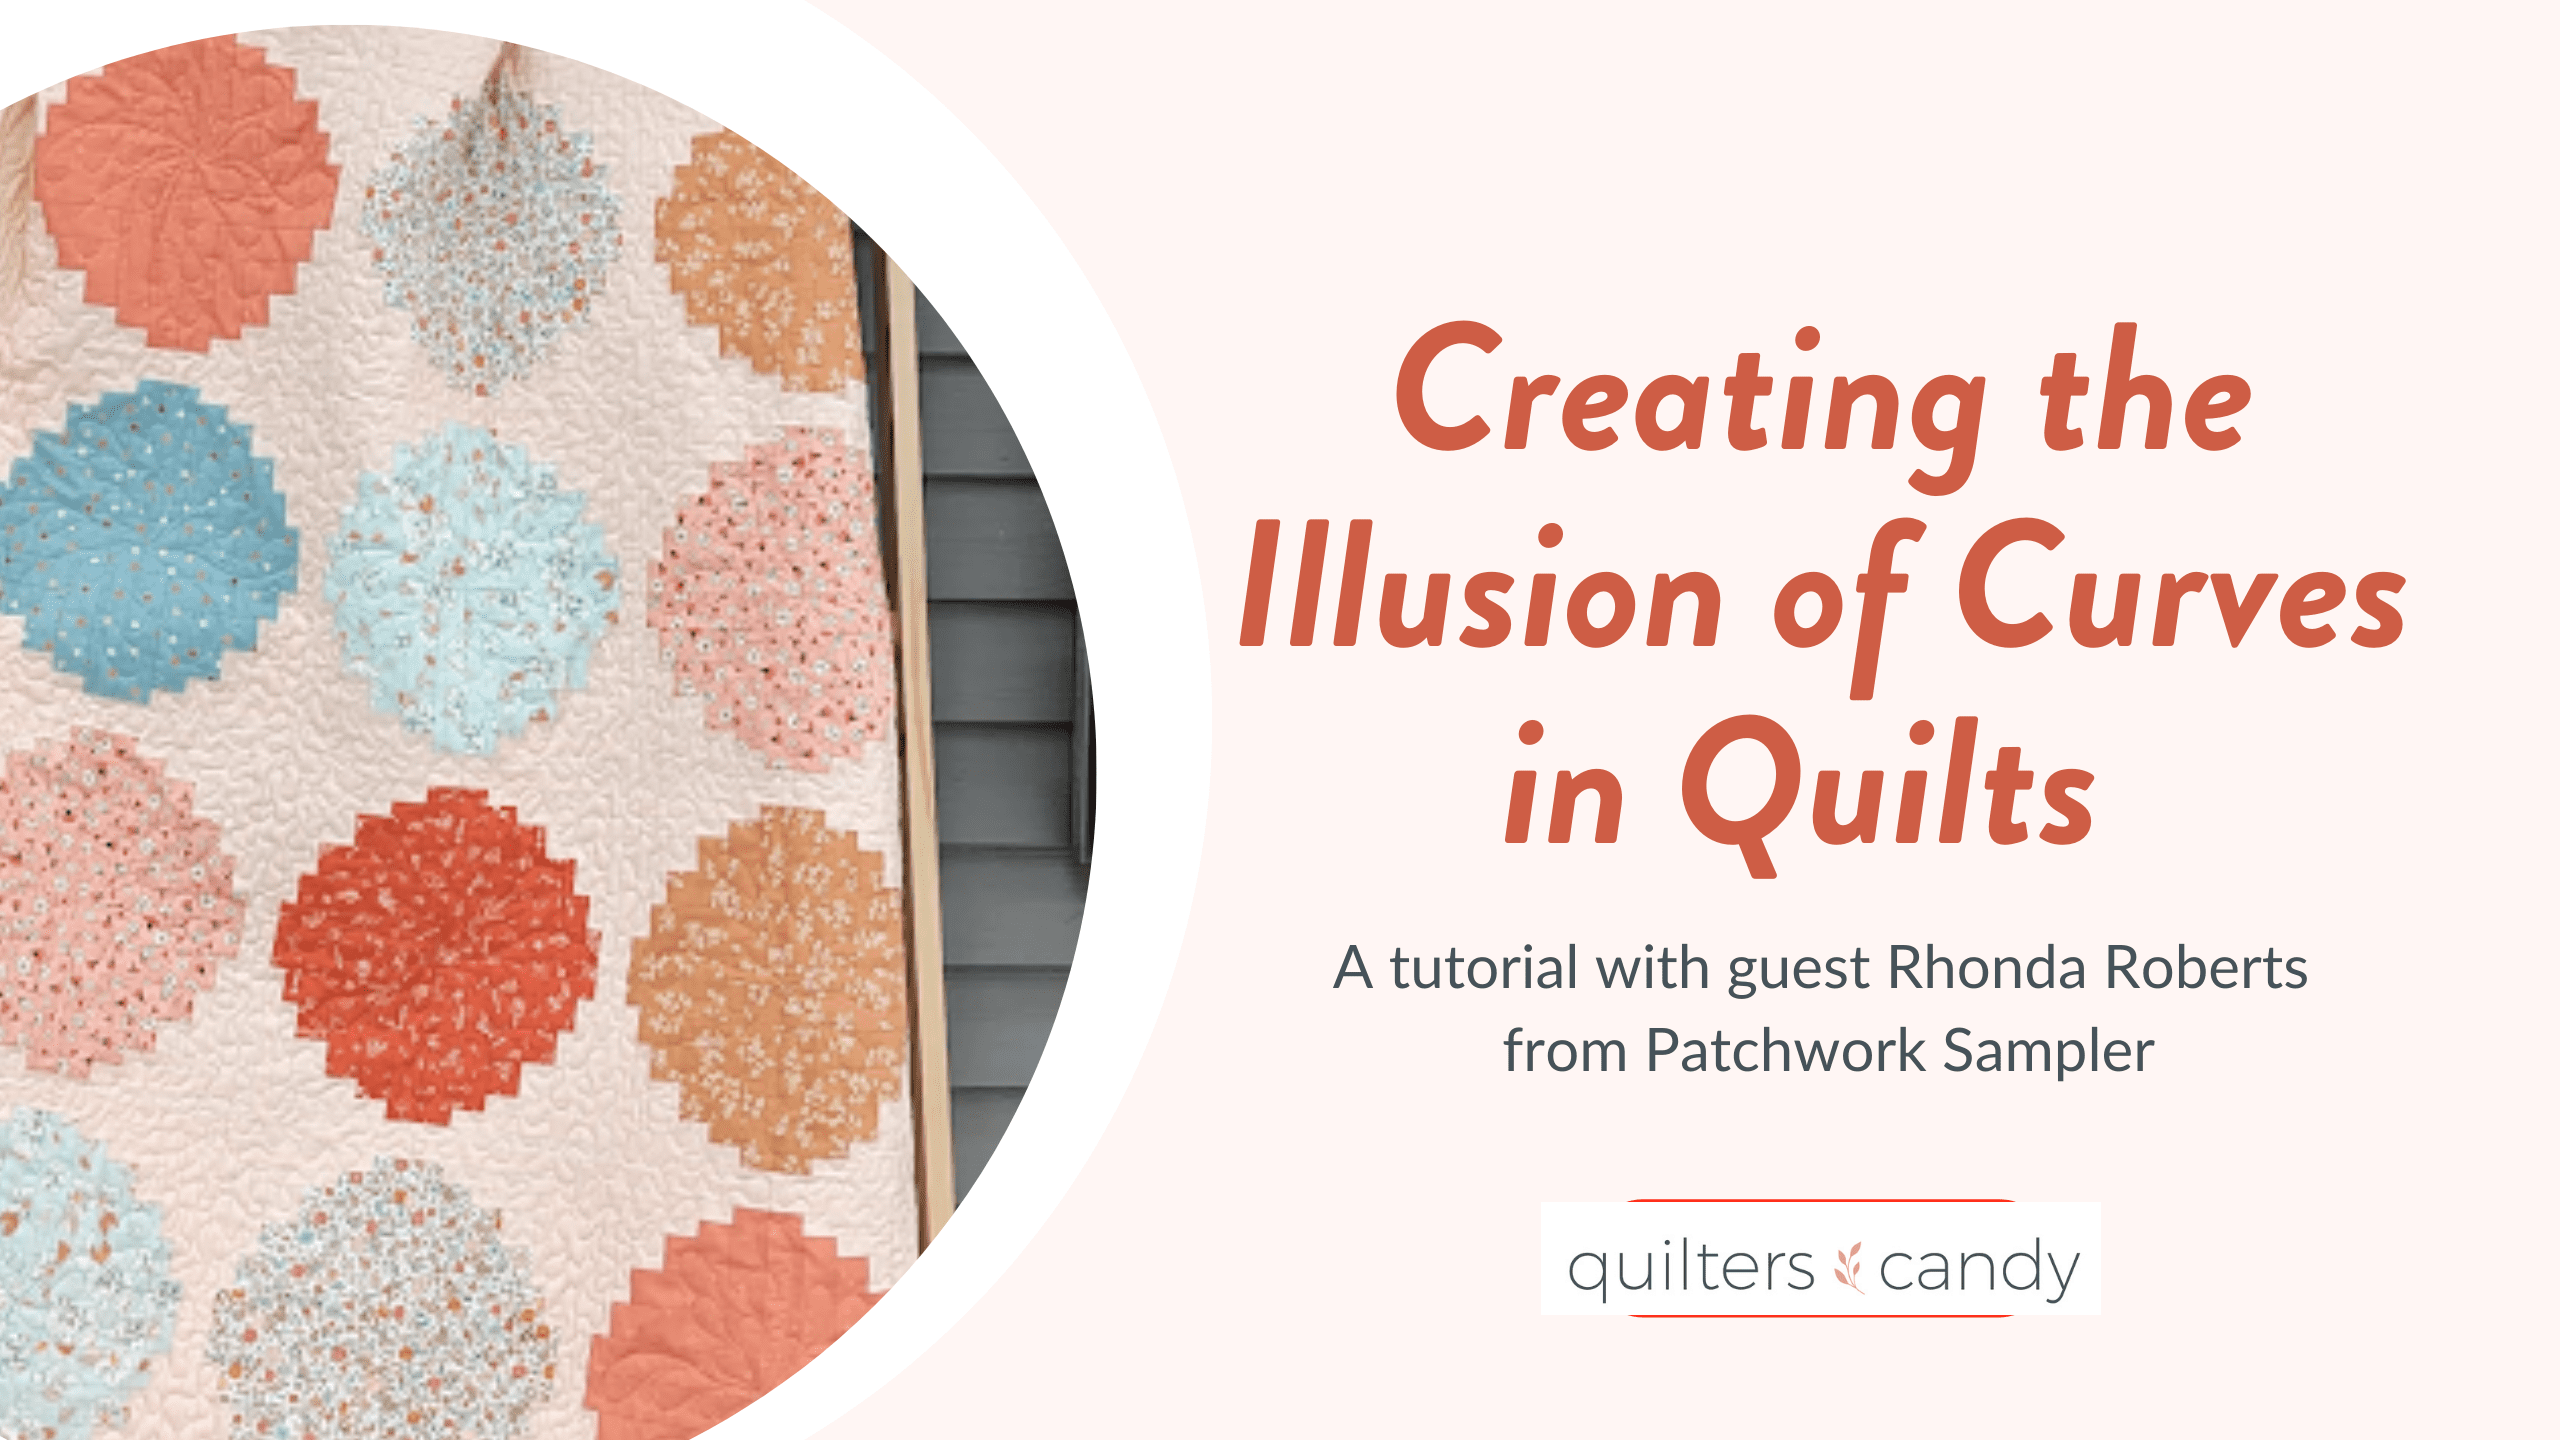 Creating the Illusion of Curves in Quilts